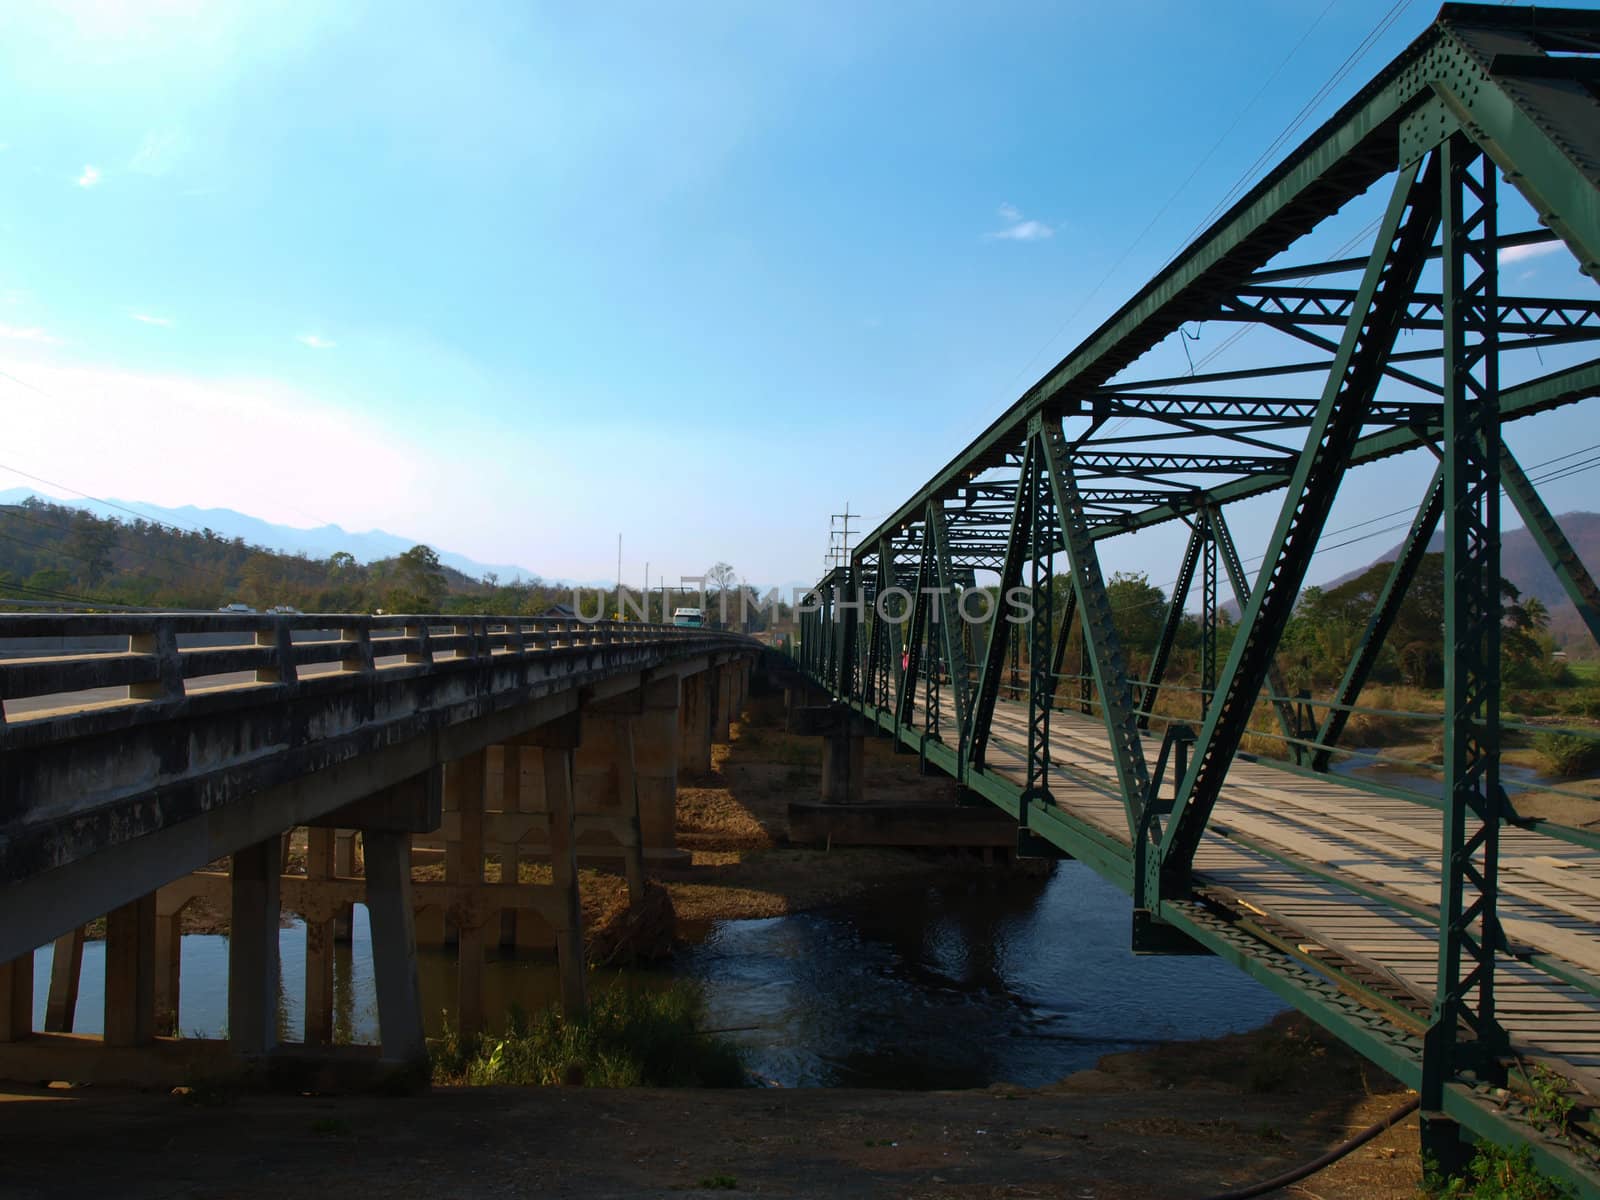 Reinforced concrete and Iron bridges over the pai river in Mae hong son, Thailand